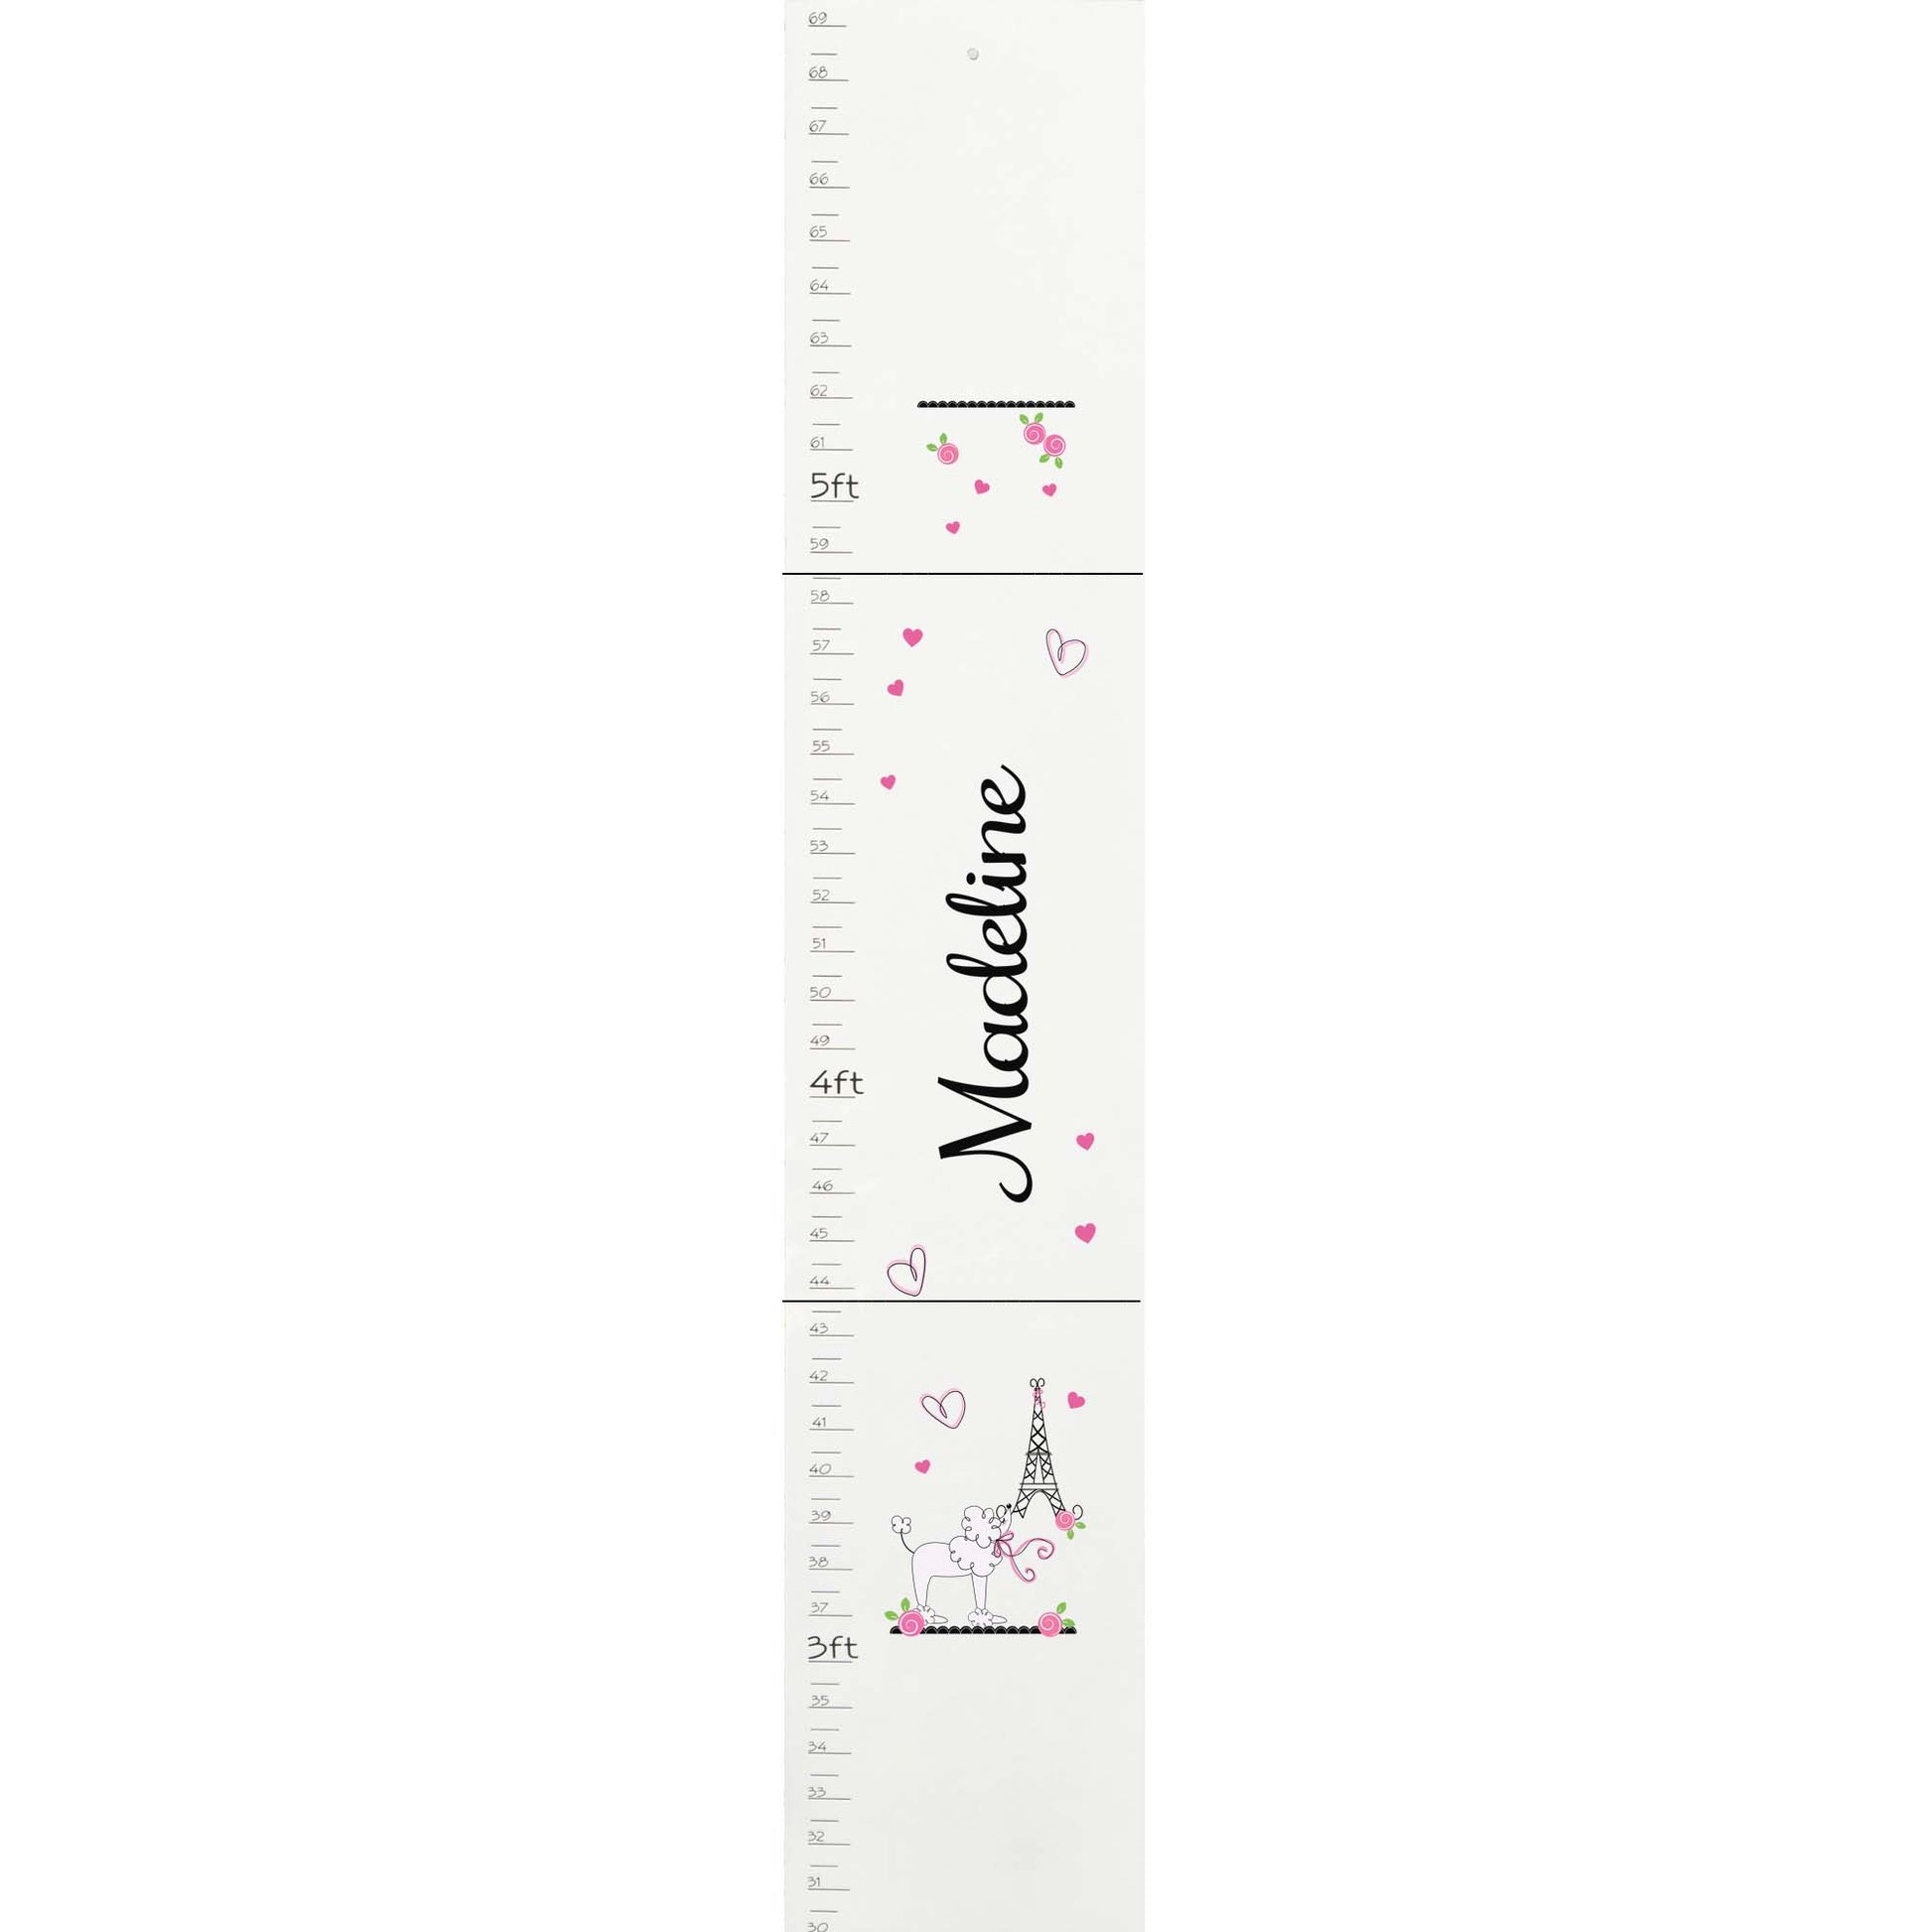 Personalized White Growth Chart With Unicorn Design